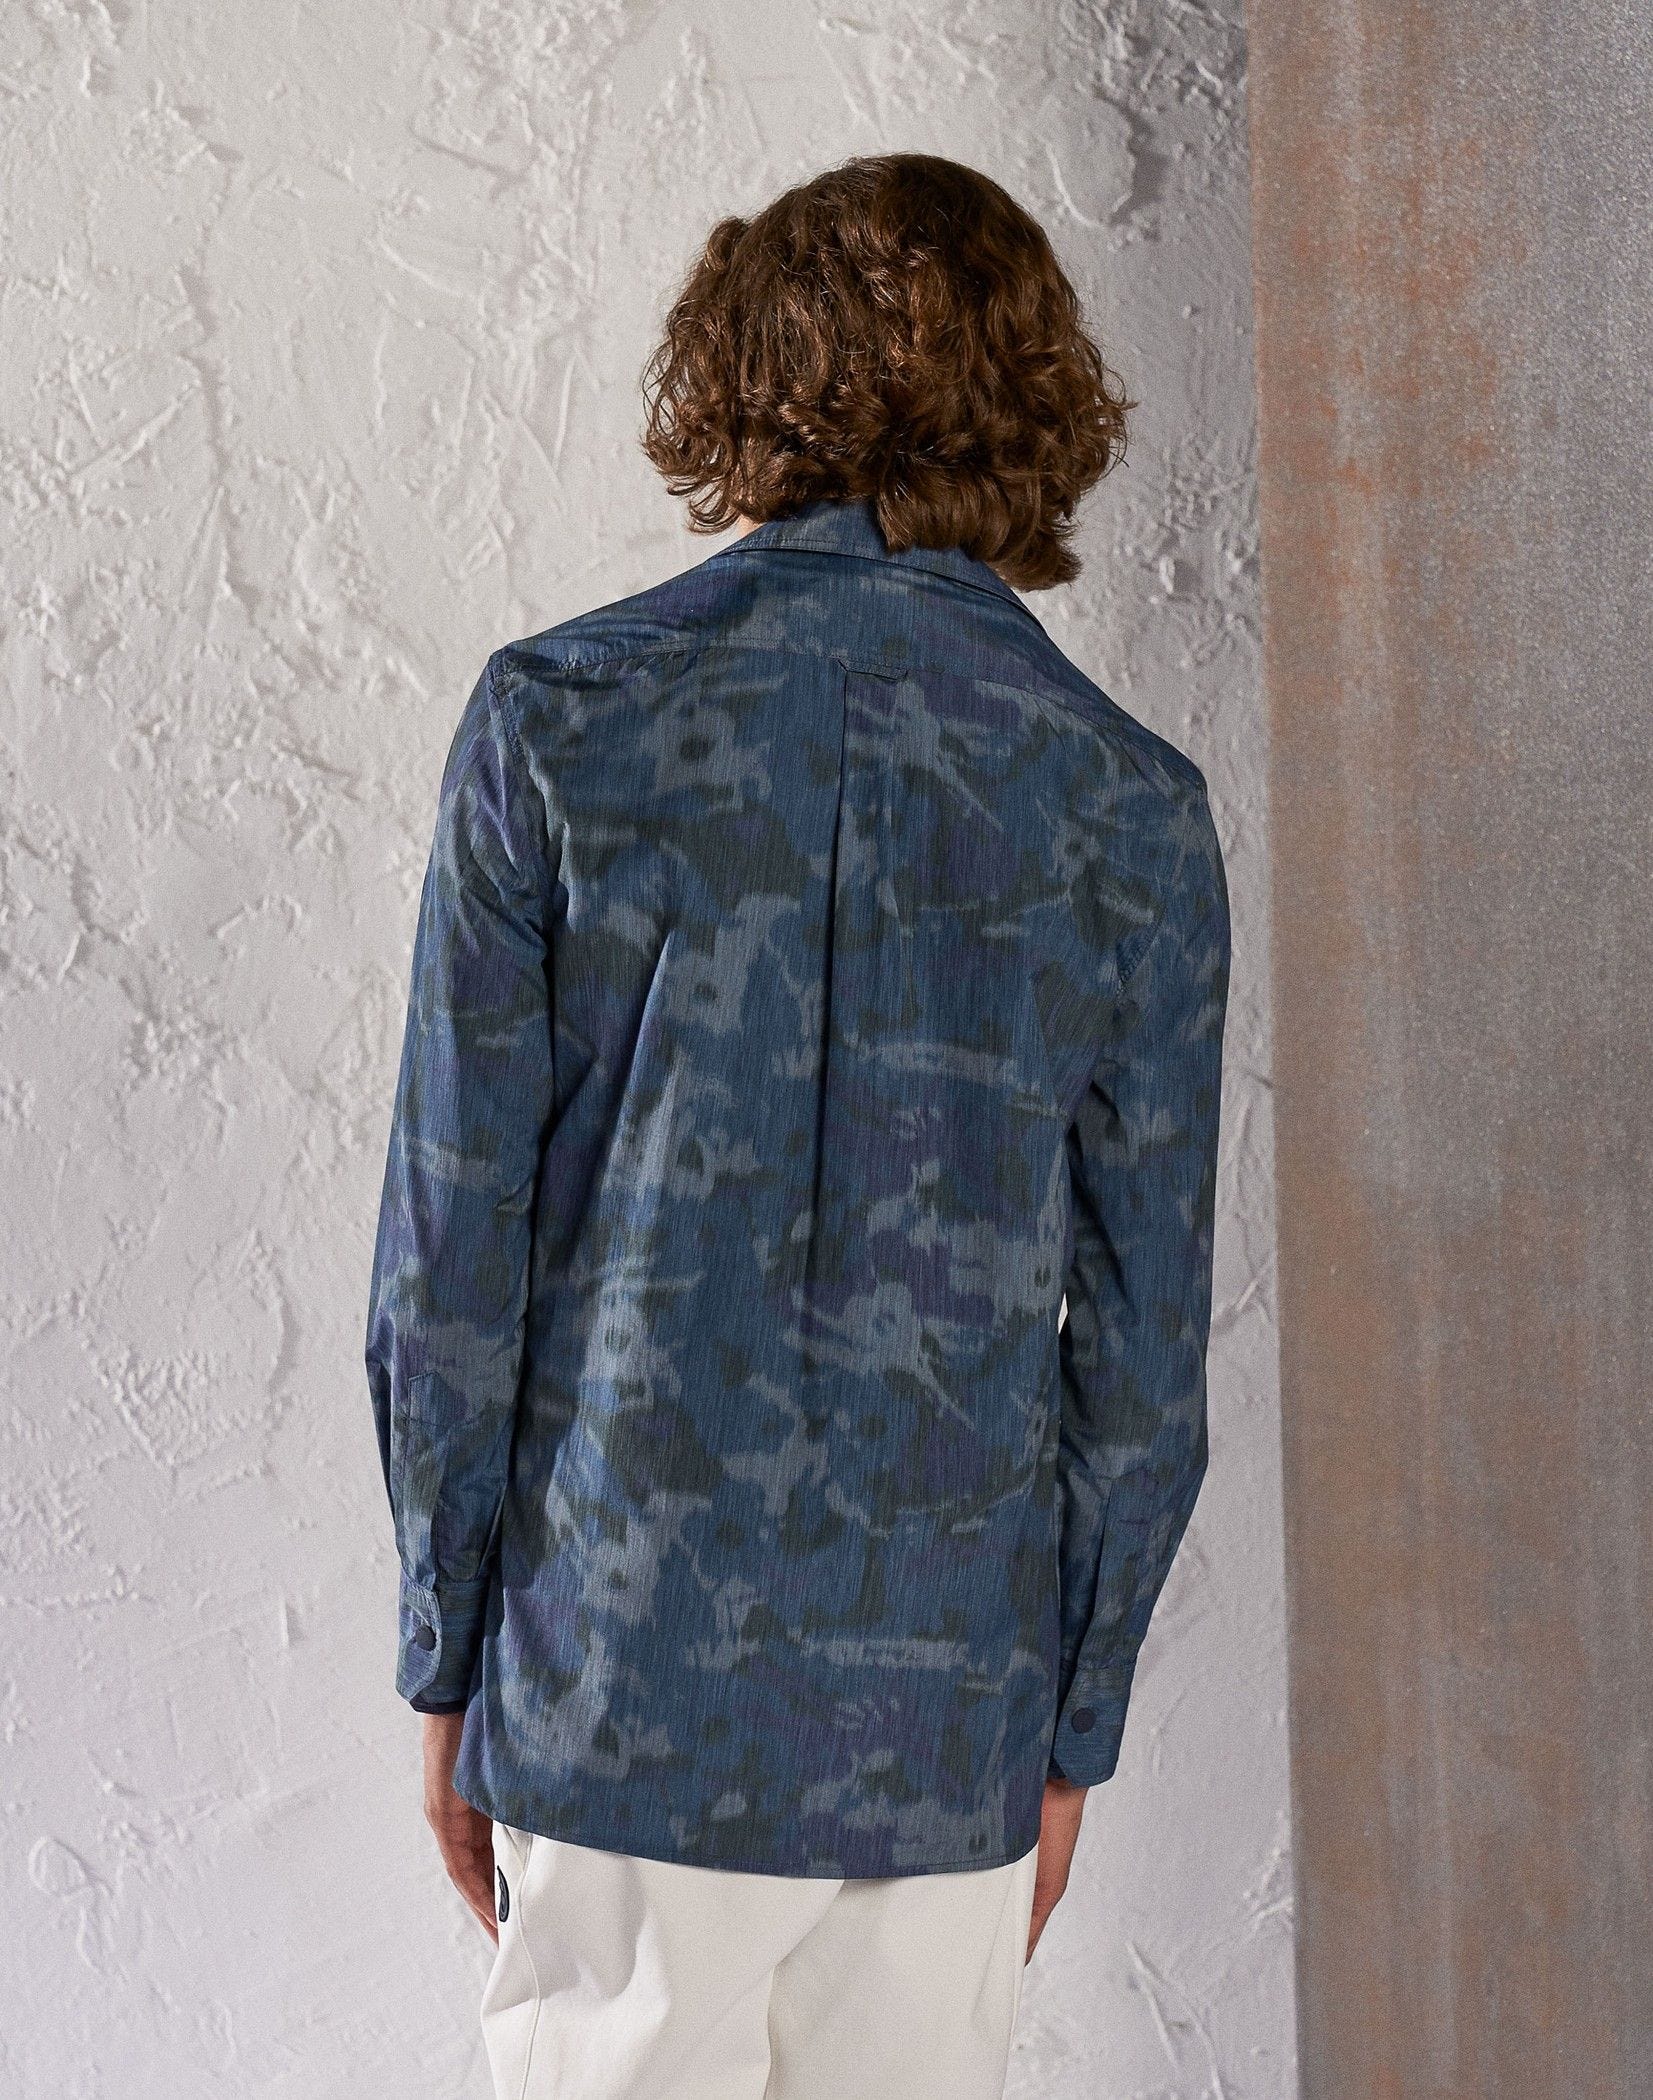 Shirt jacket with camouflower print